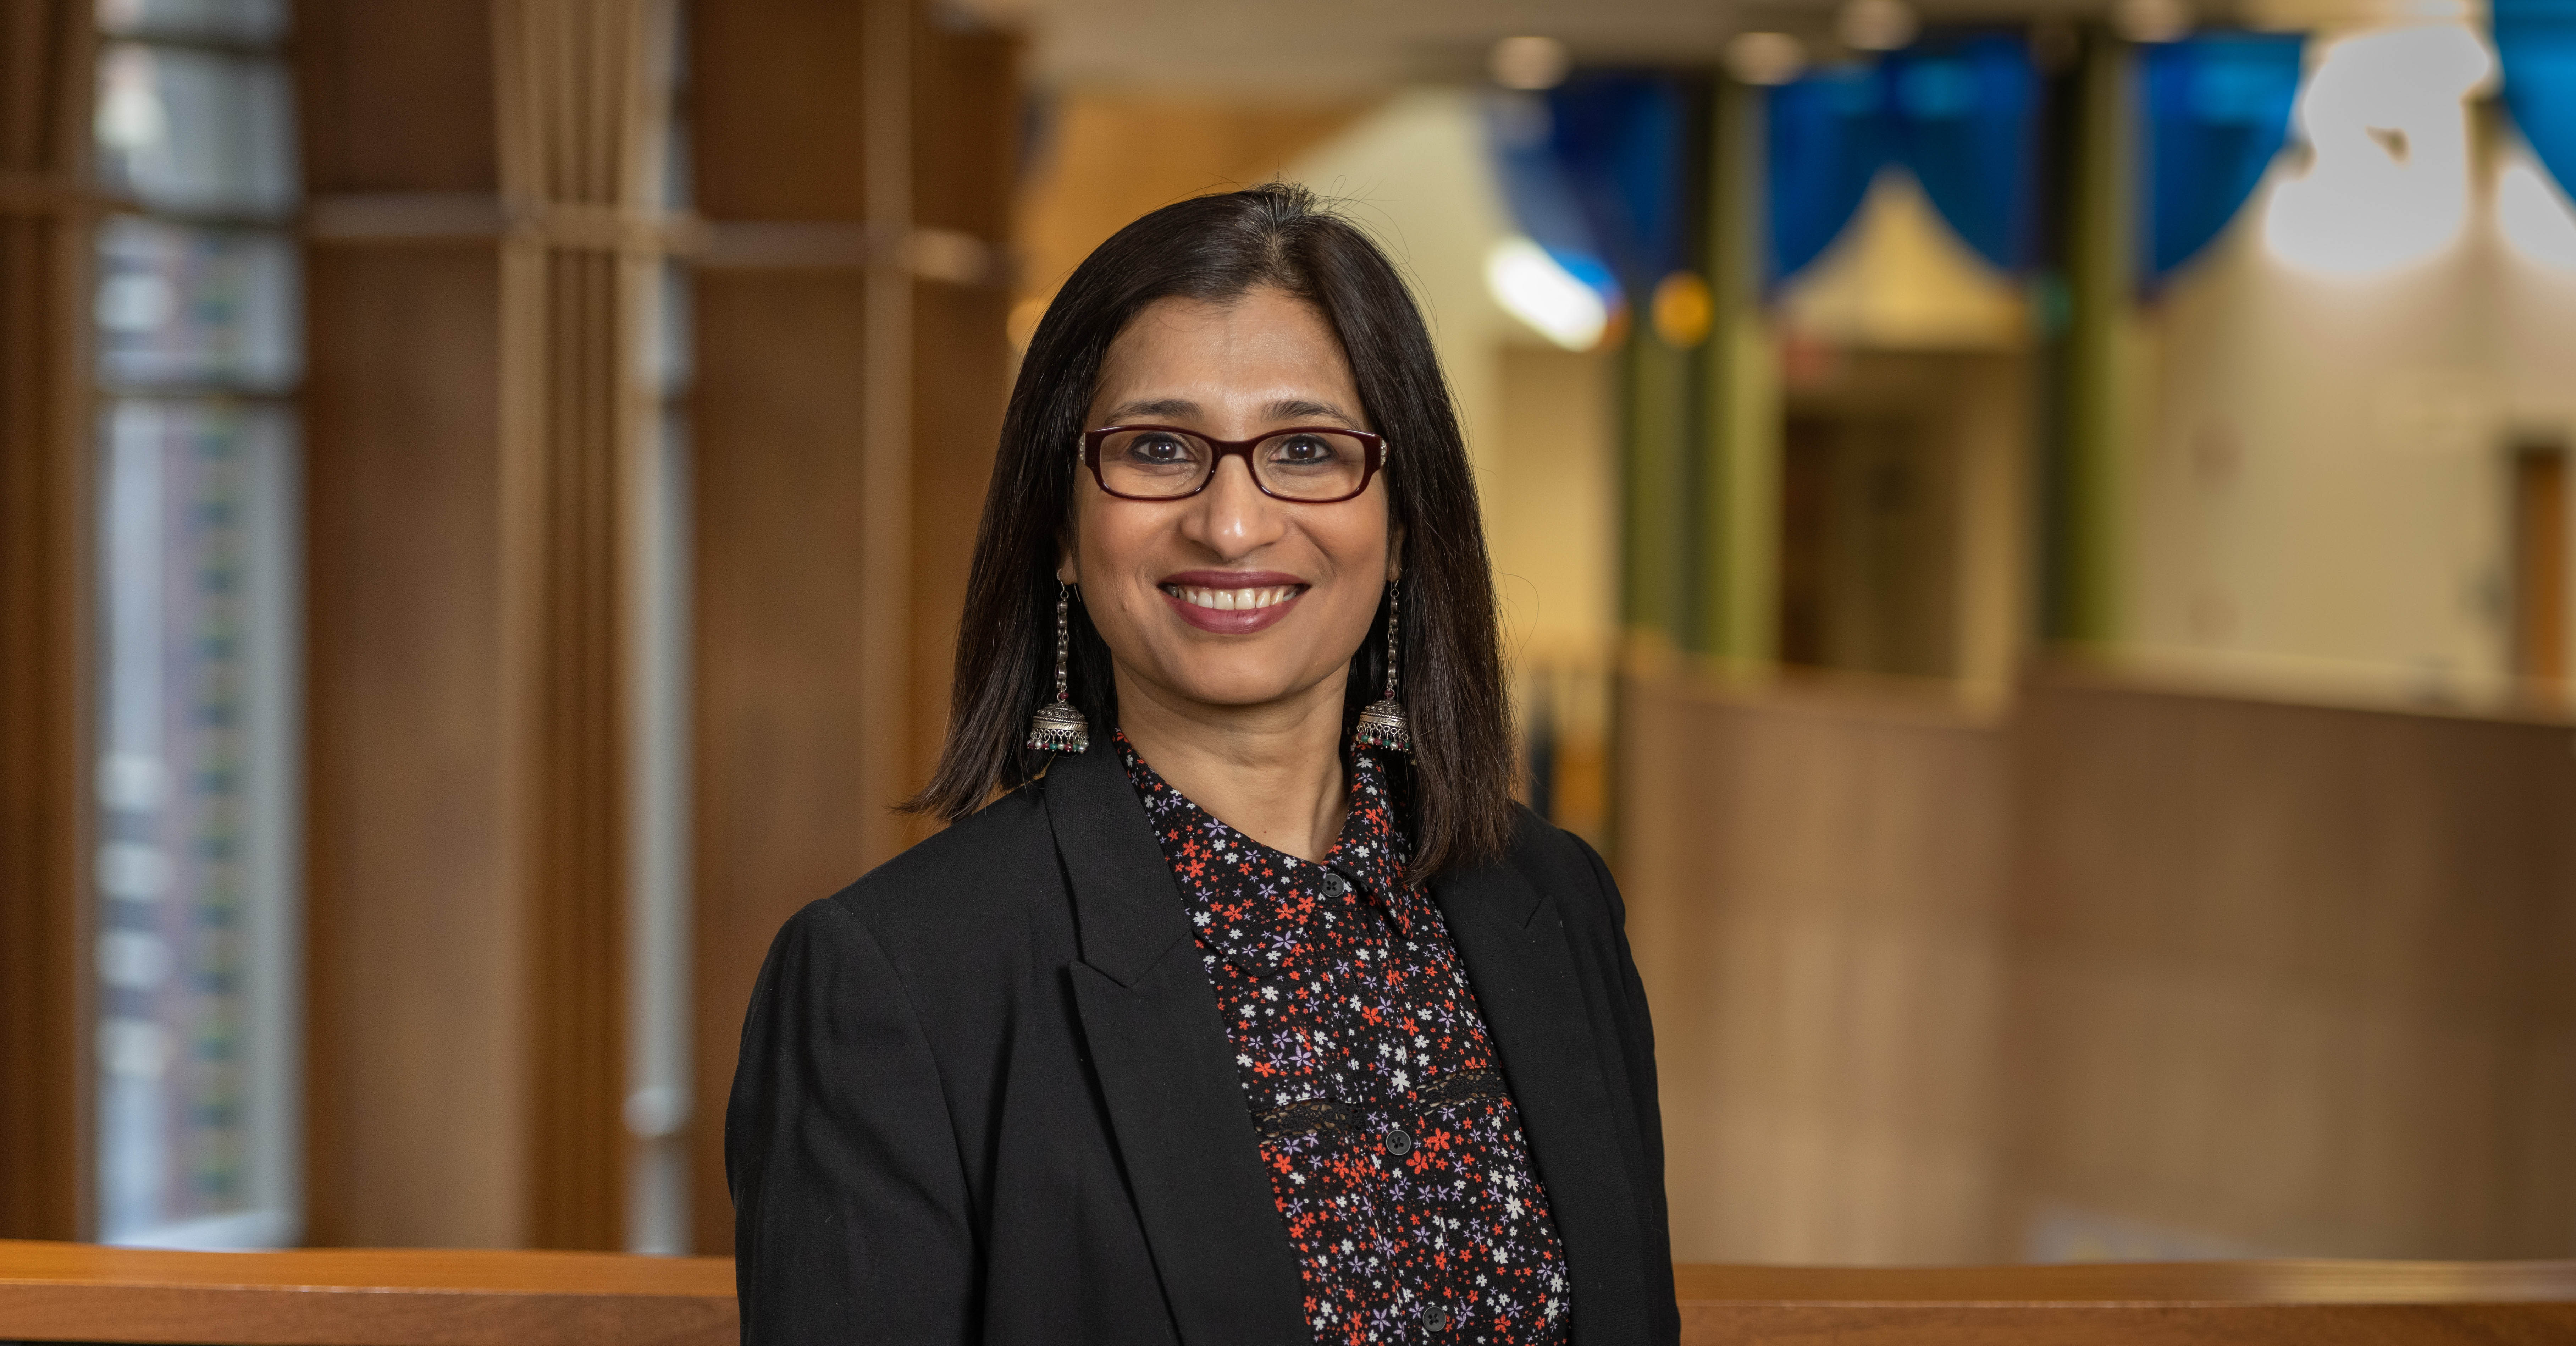 Bhramar Mukherjee to lead research data services strategy